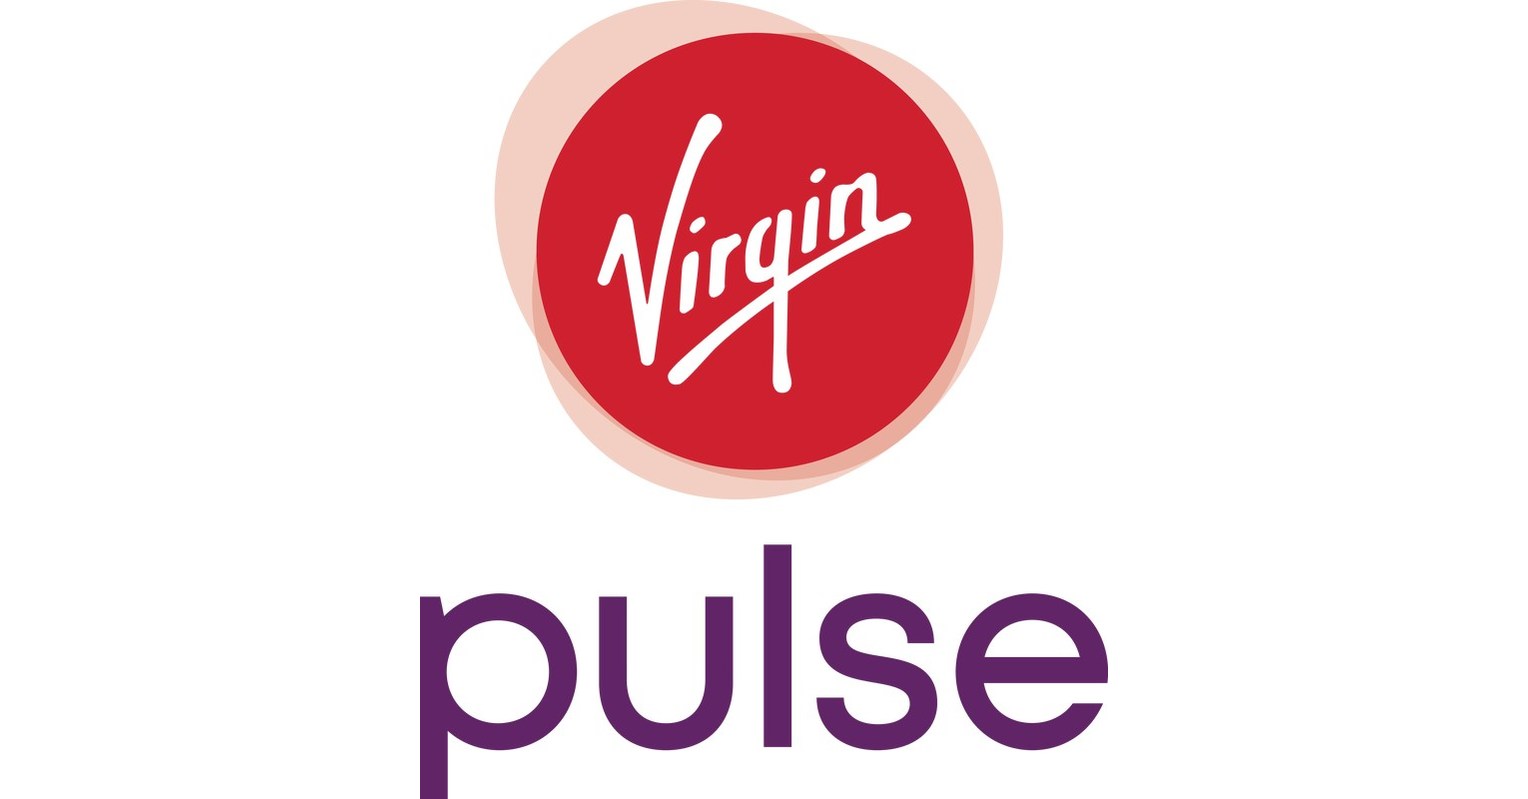 Virgin Pulse Adds New Partners & Expanded Offerings to Homebase for Health's Curated Ecosystem to Support Key Health and Wellbeing Needs